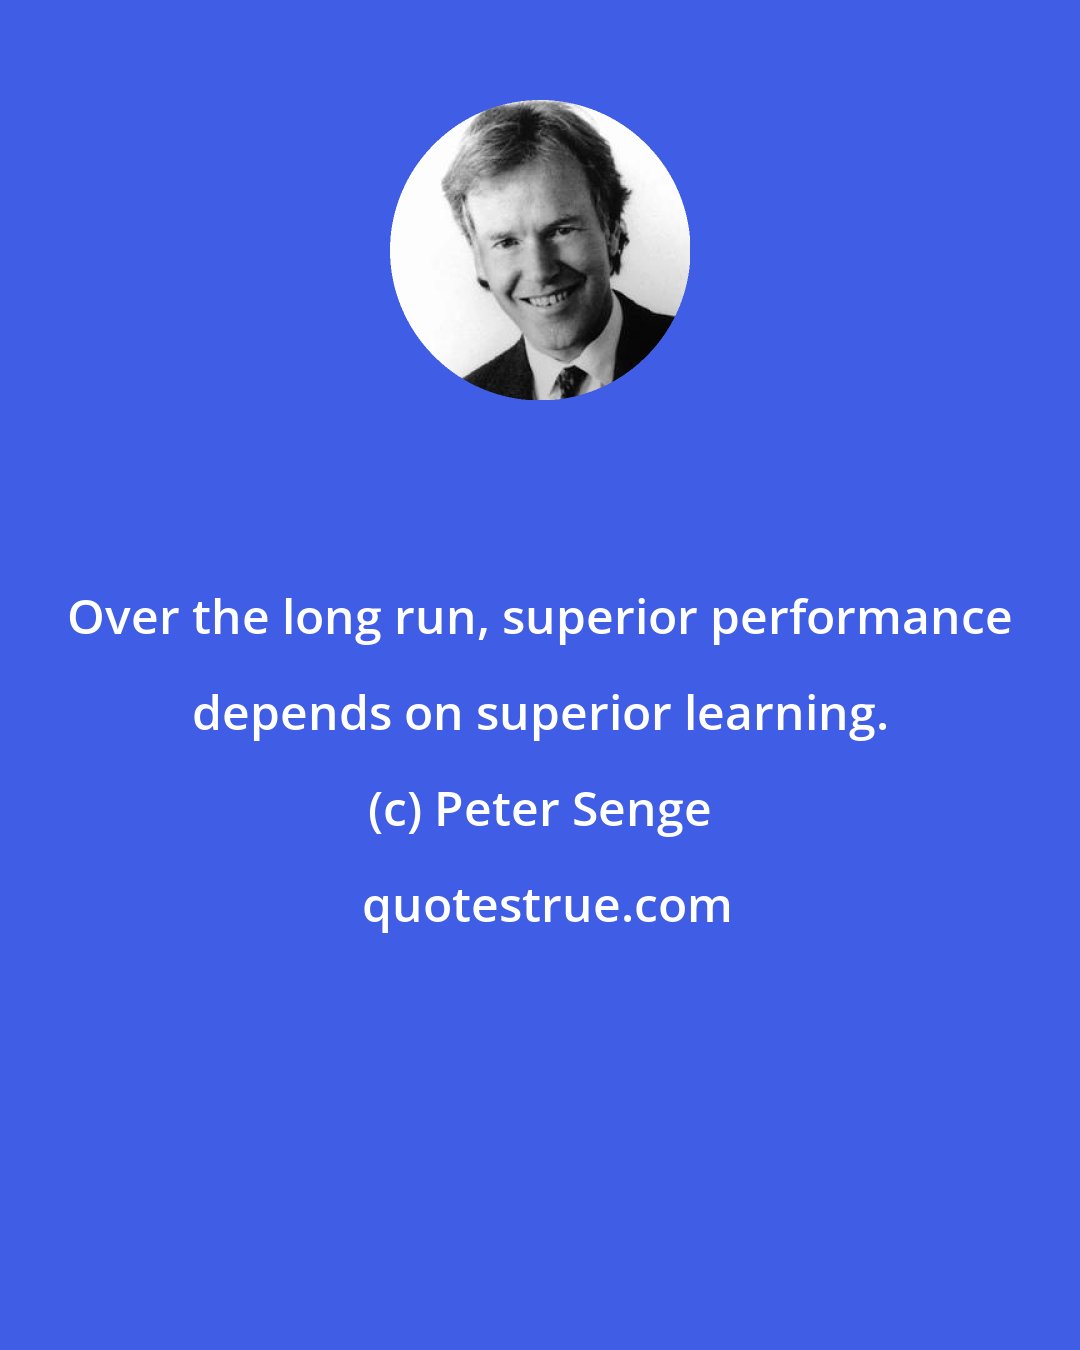 Peter Senge: Over the long run, superior performance depends on superior learning.